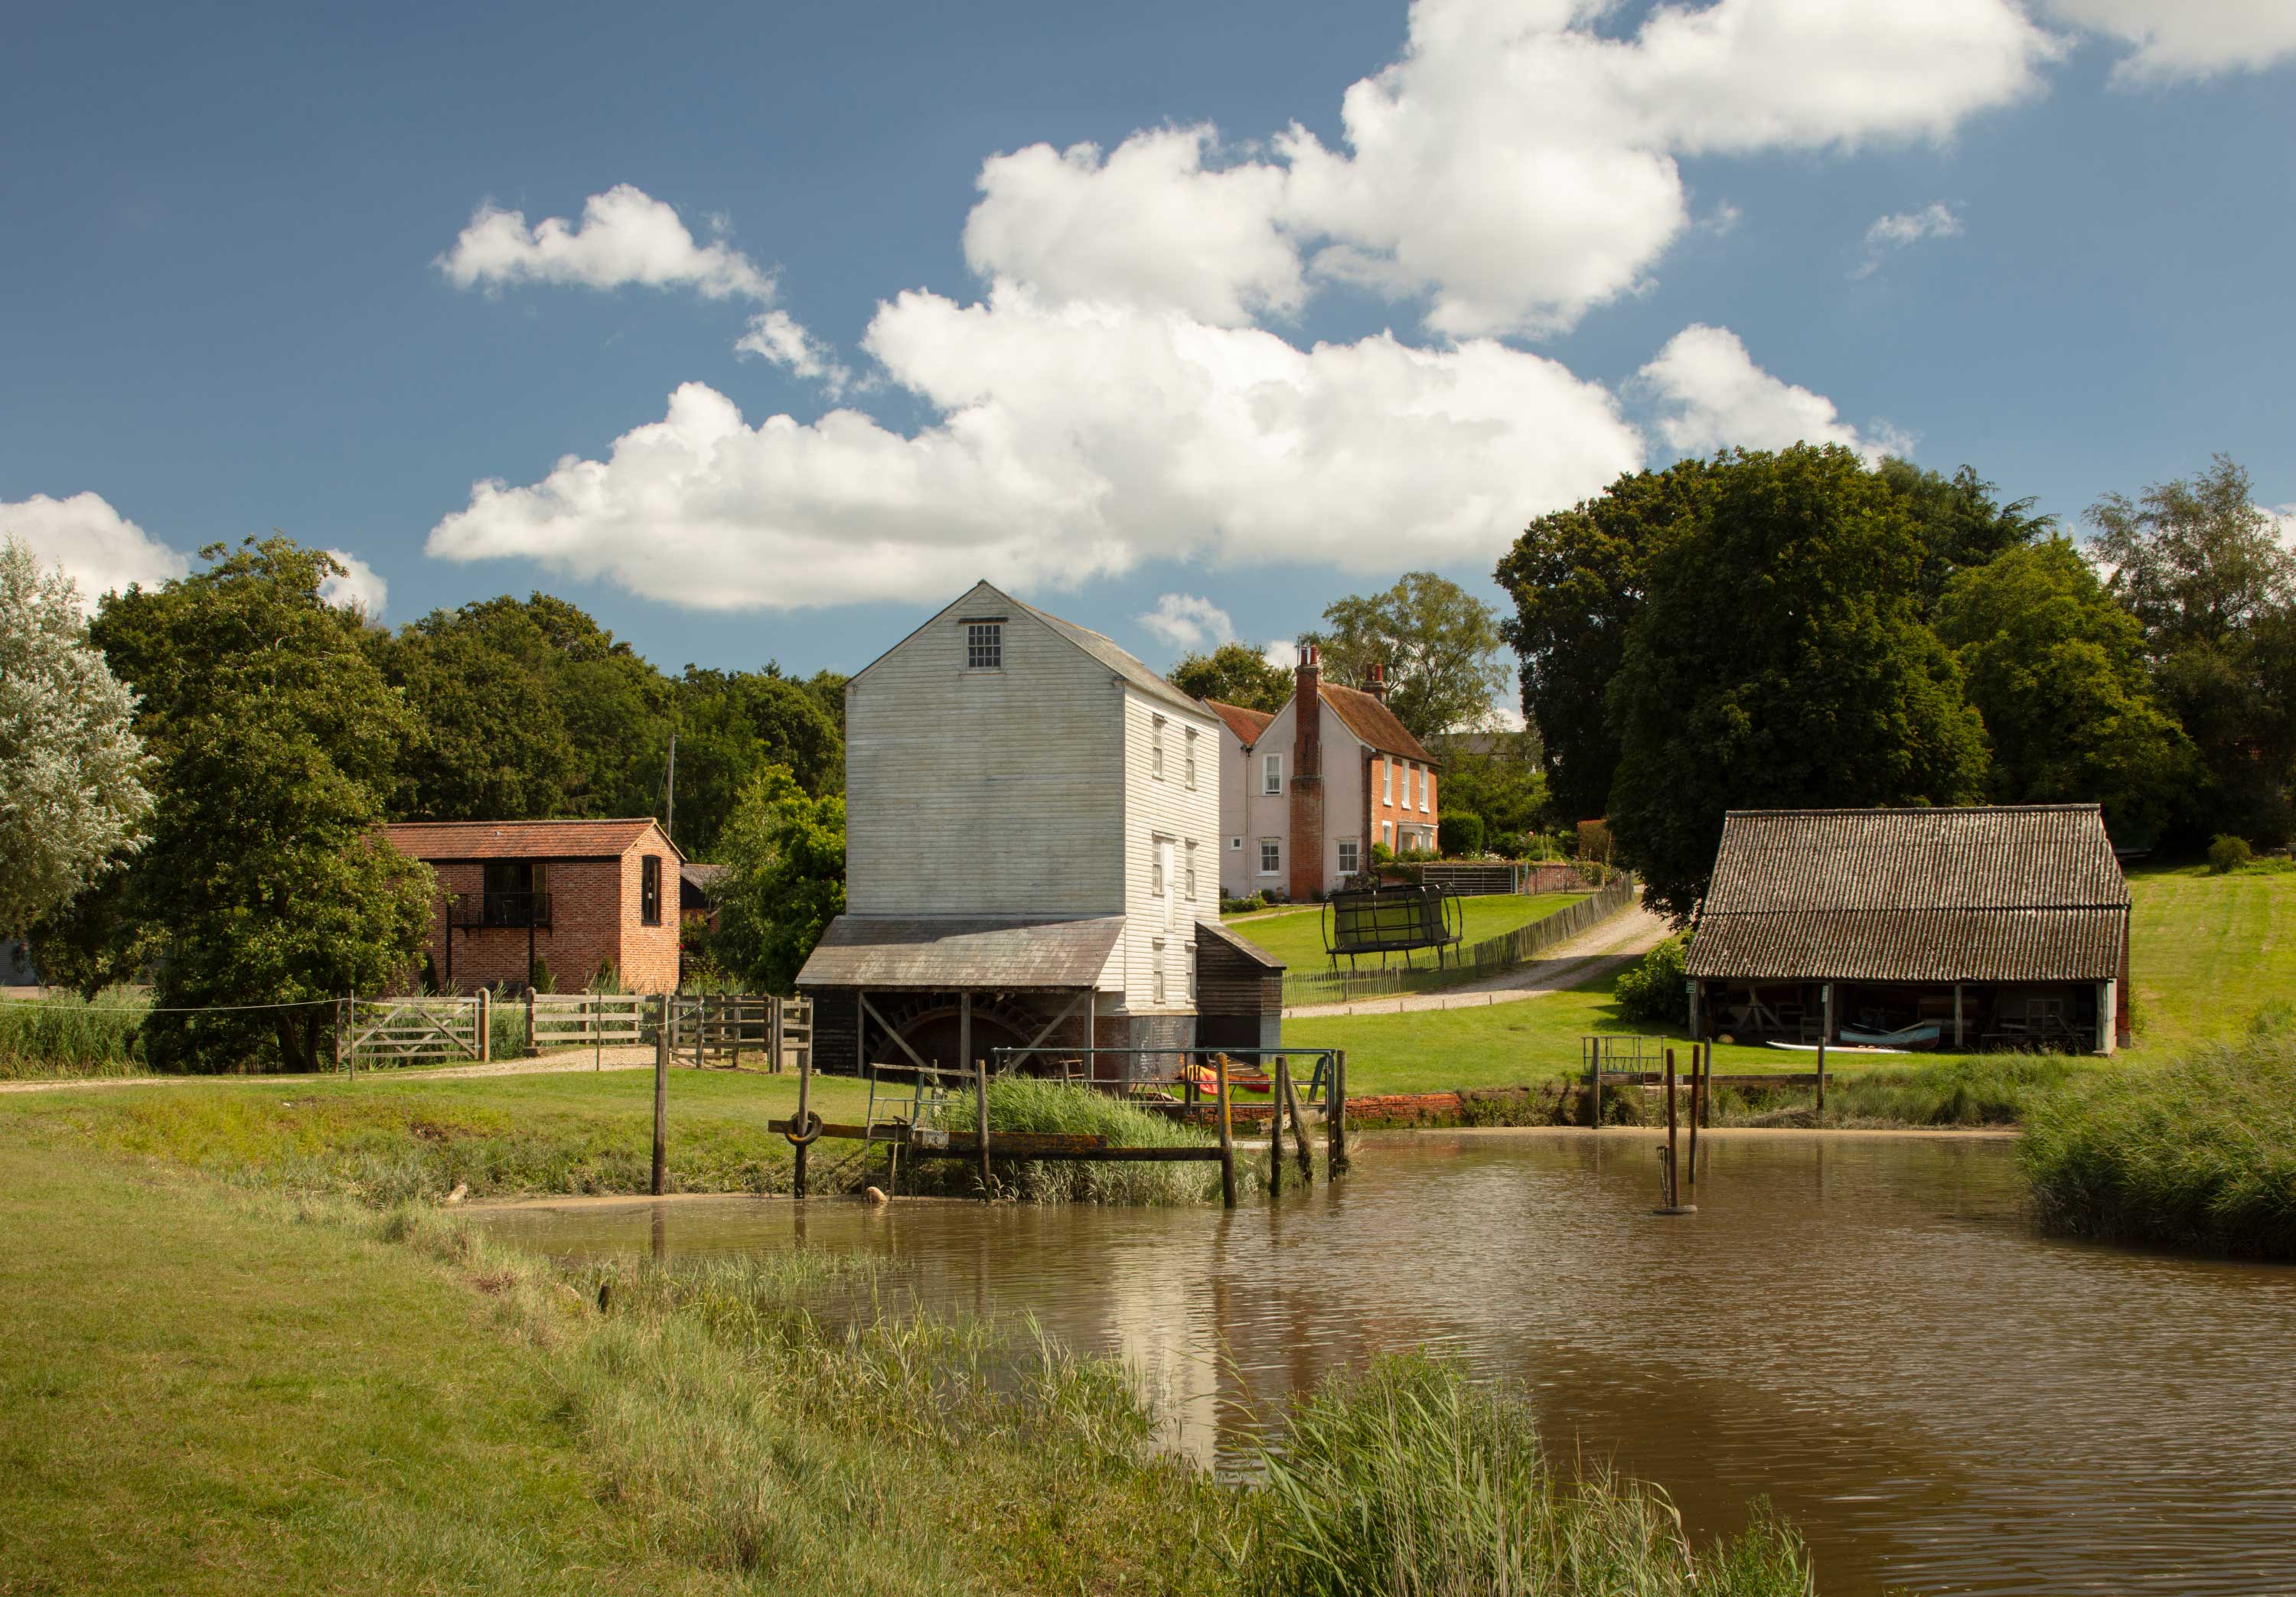 Mill buildings set on a hill with a lake in the foreground